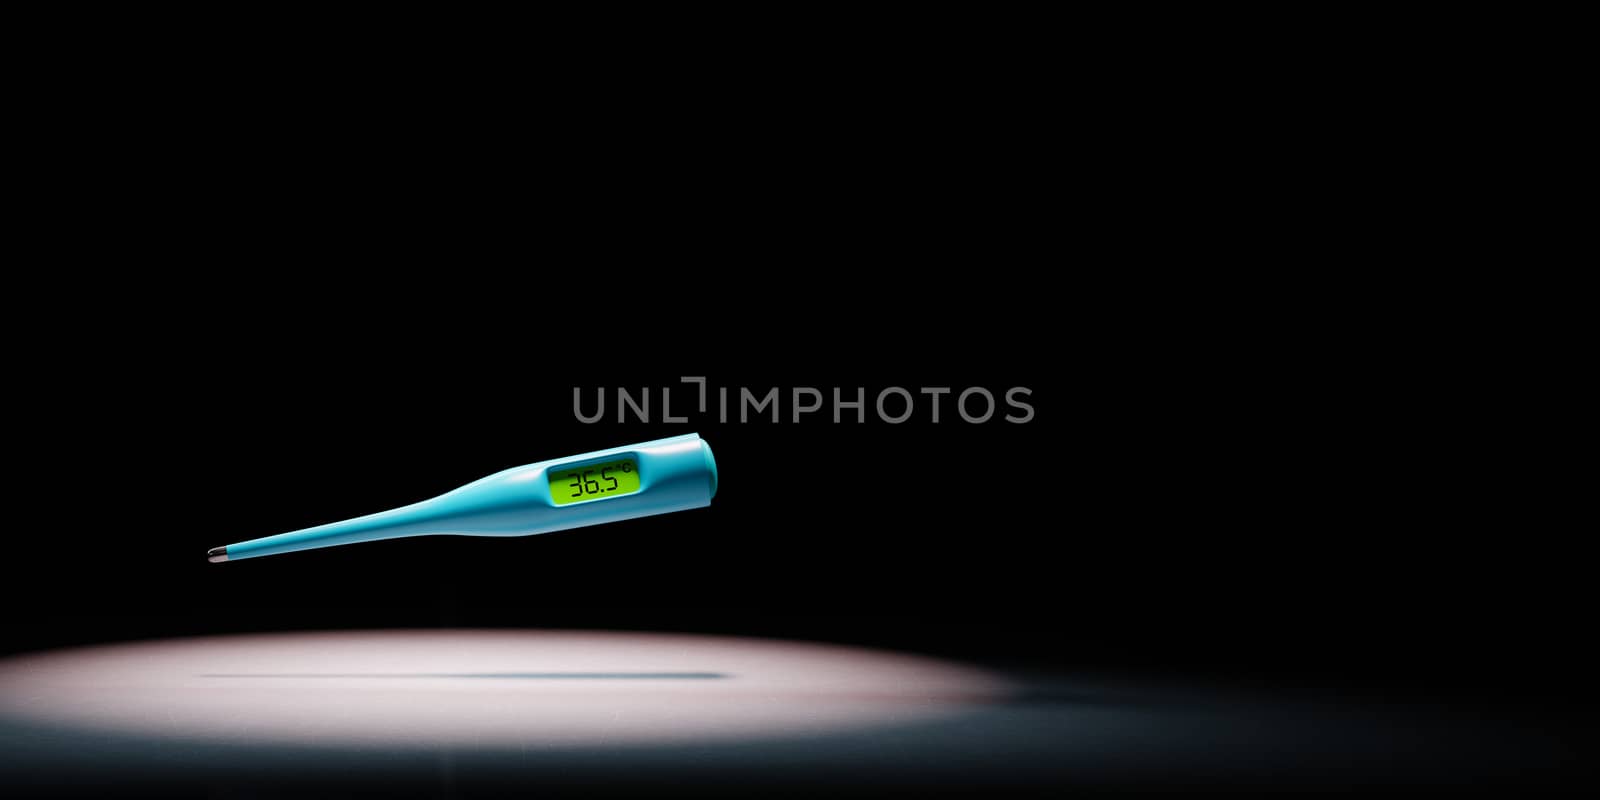 Clinical Digital Thermometer Spotlighted on Black Background by make